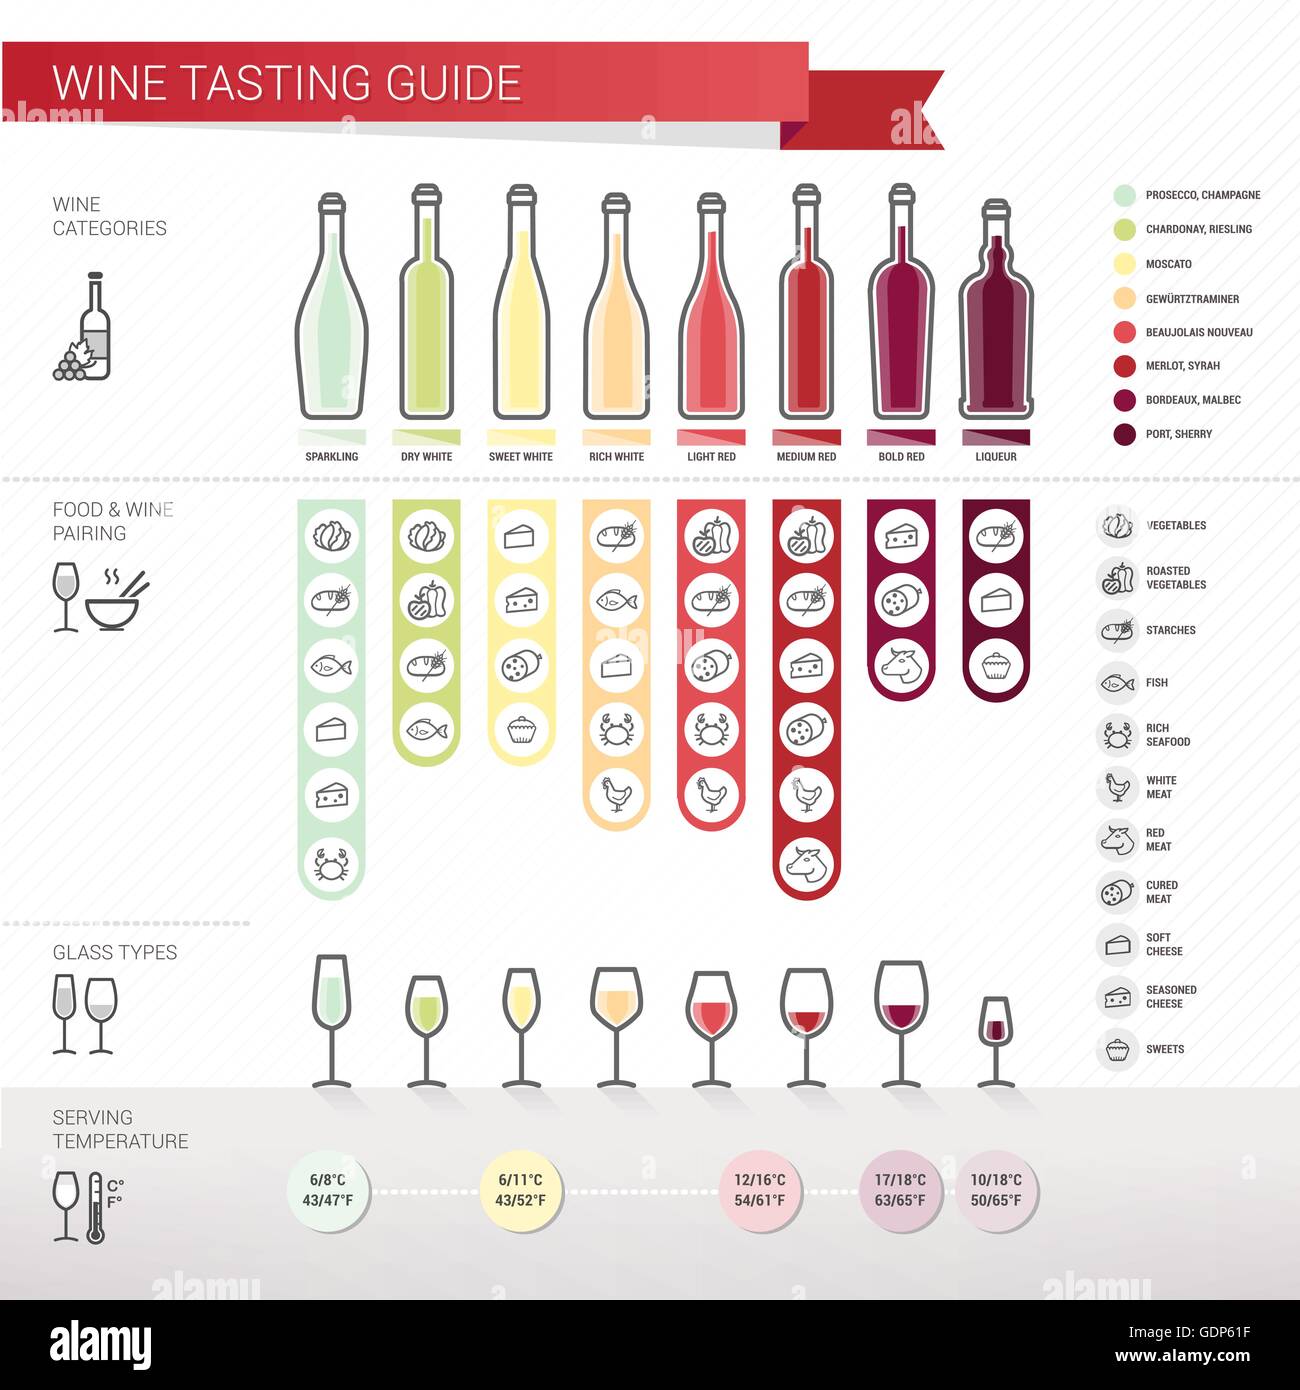 Wine tasting complete guide with food pairing, bottle and glass types, srving temperature and wine types. Stock Vector